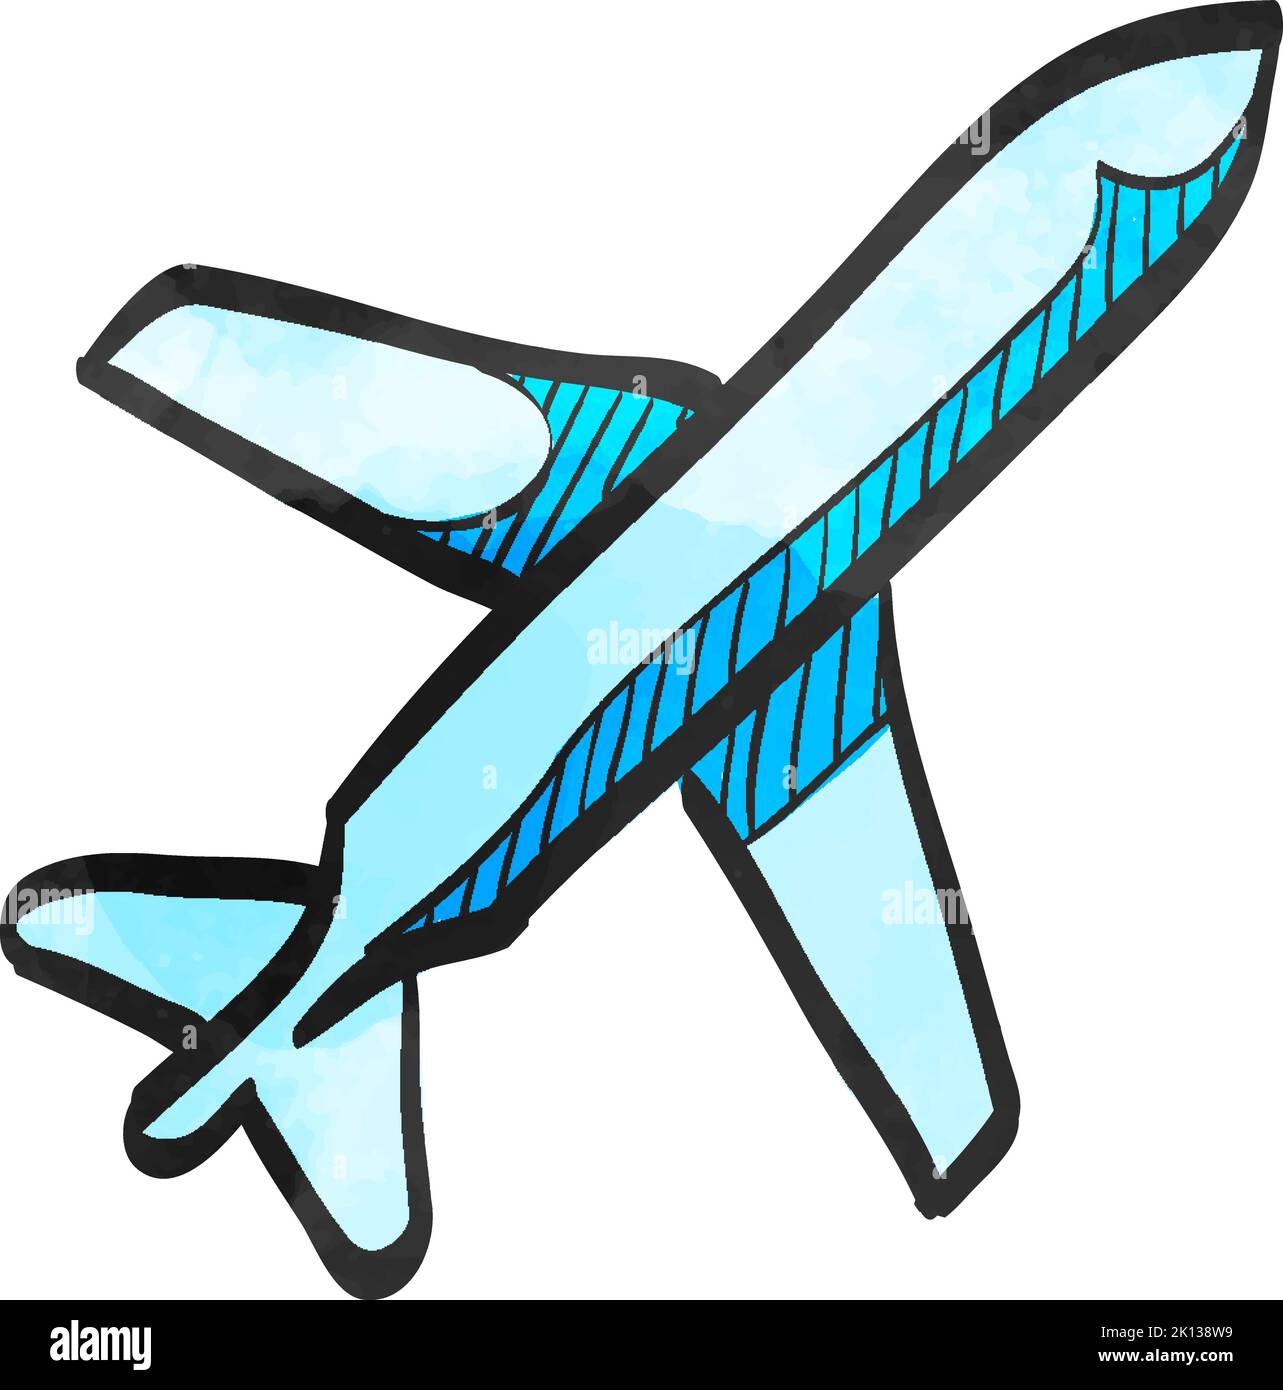 Airplane icon in watercolor style. Stock Vector